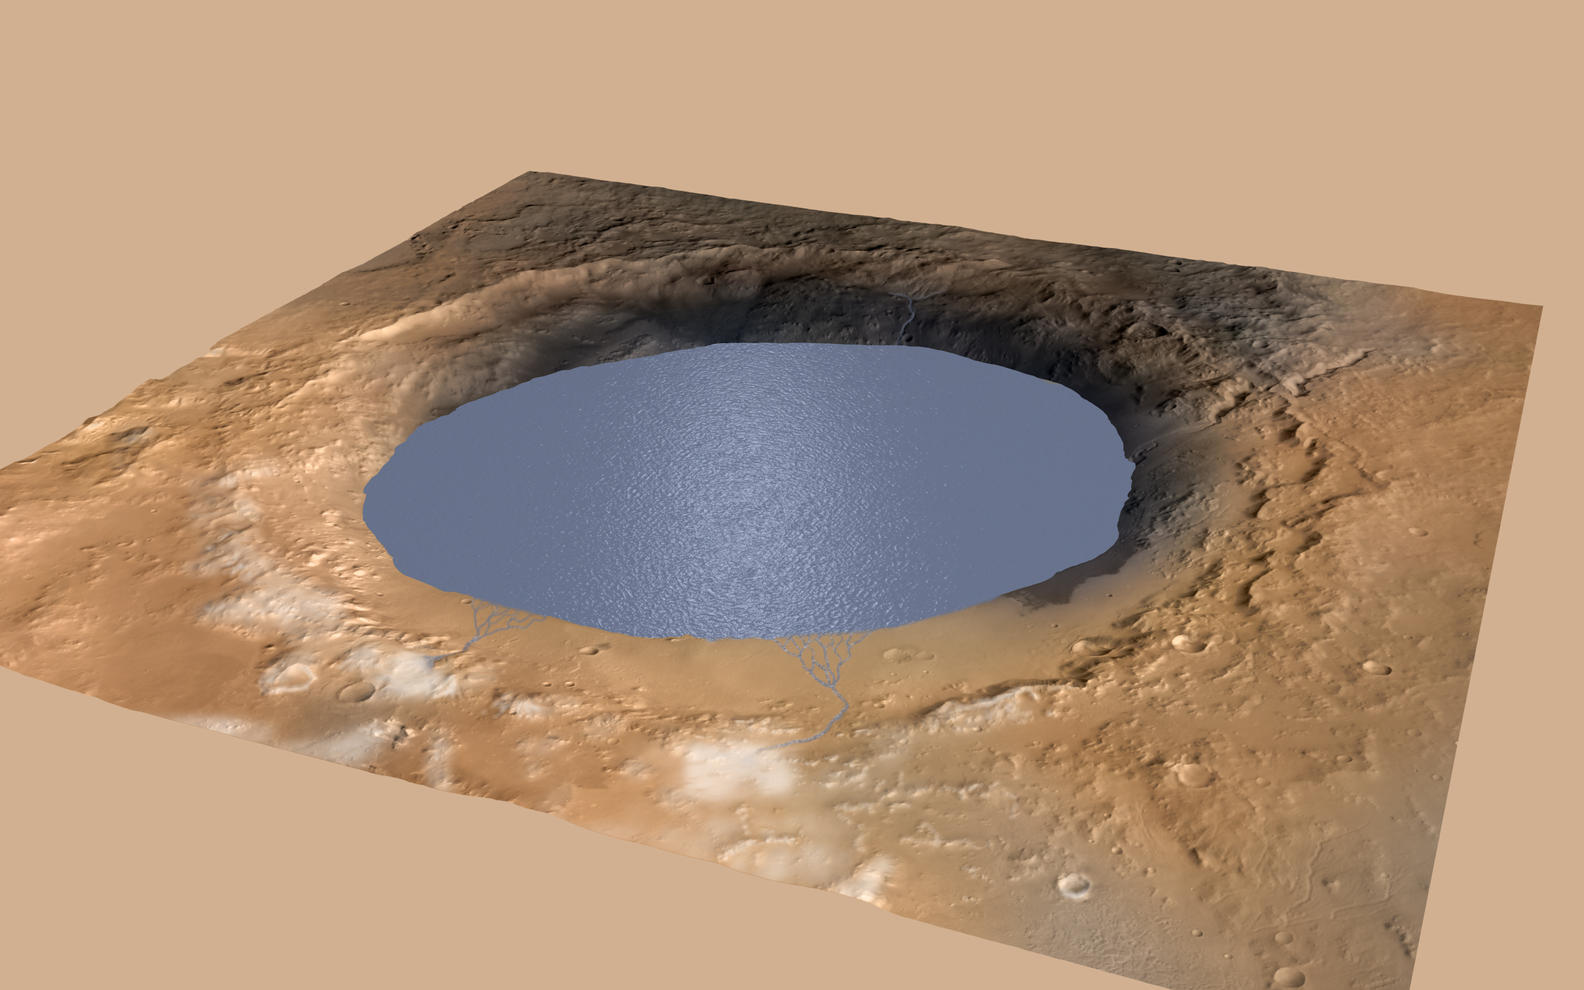 Simulated View of Gale Crater Lake on Mars